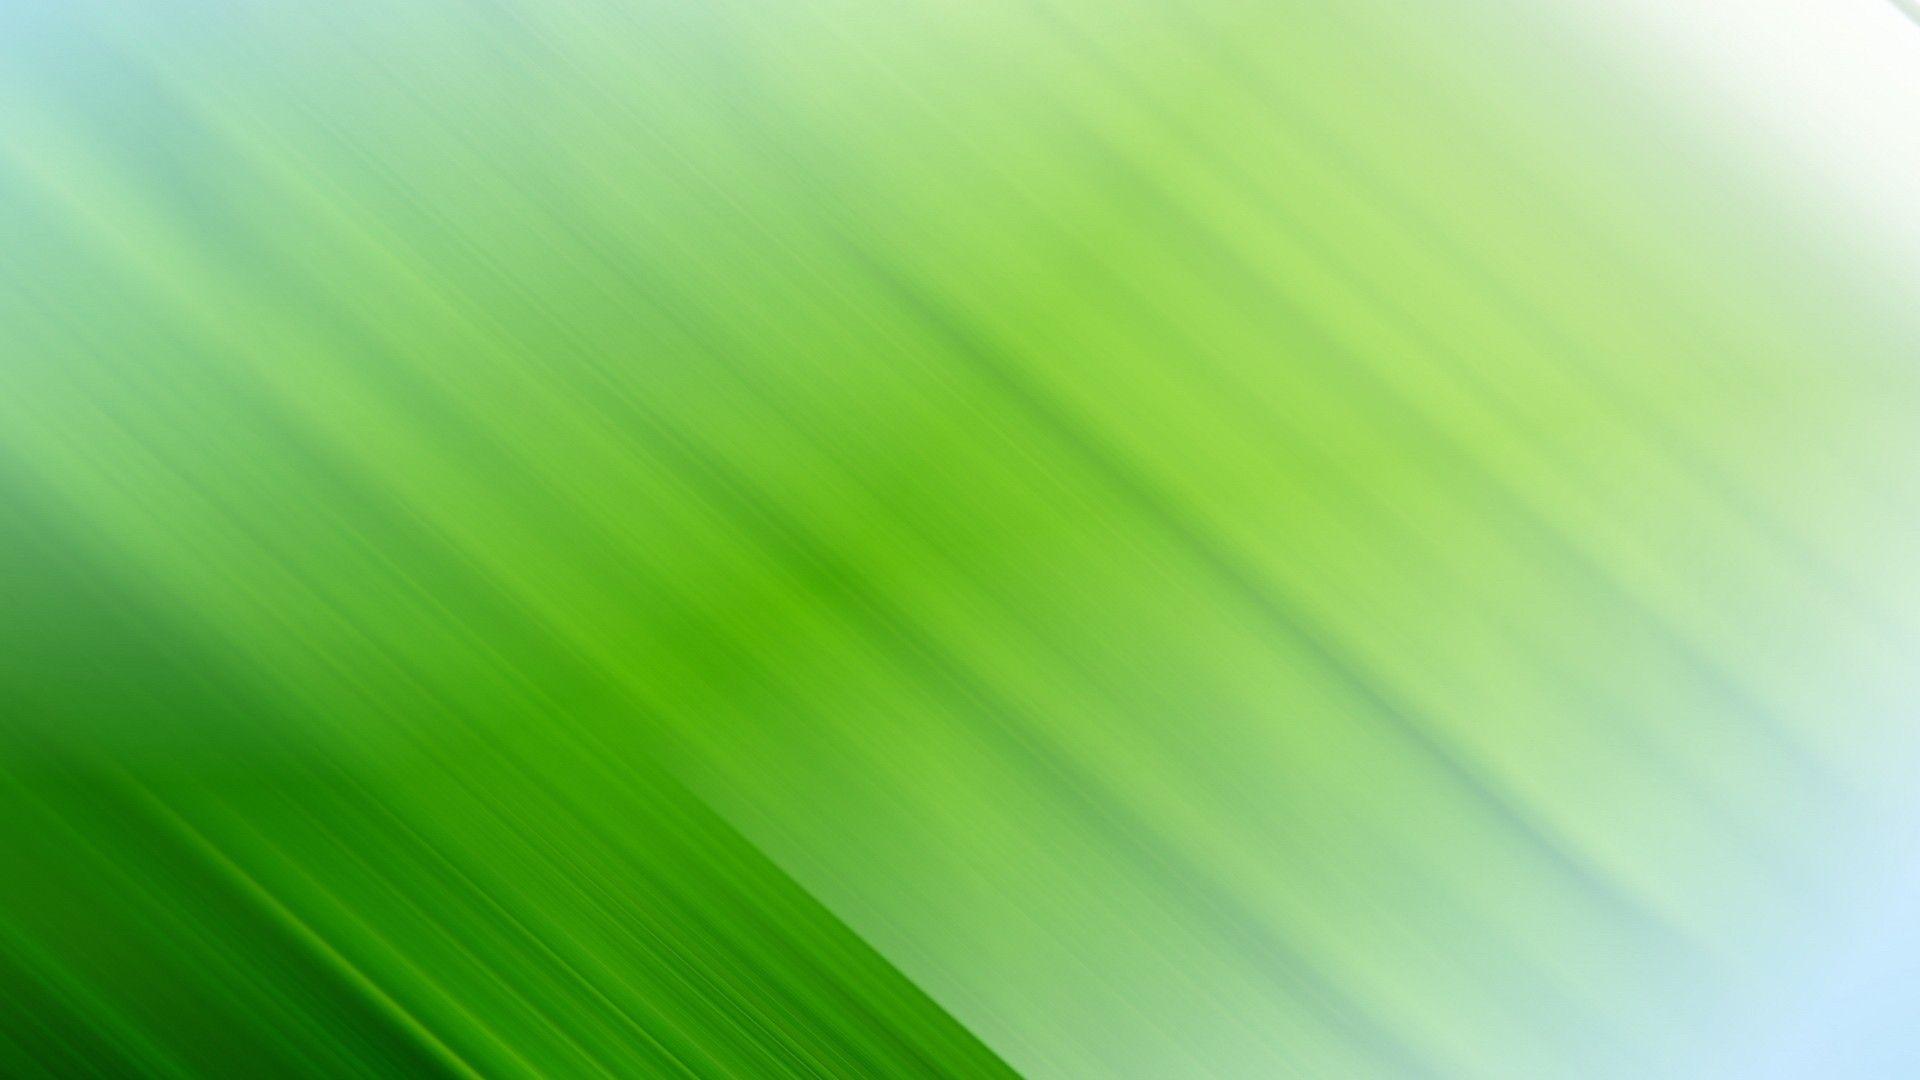 Green Abstract Wallpaper 27601 1920x1080 px